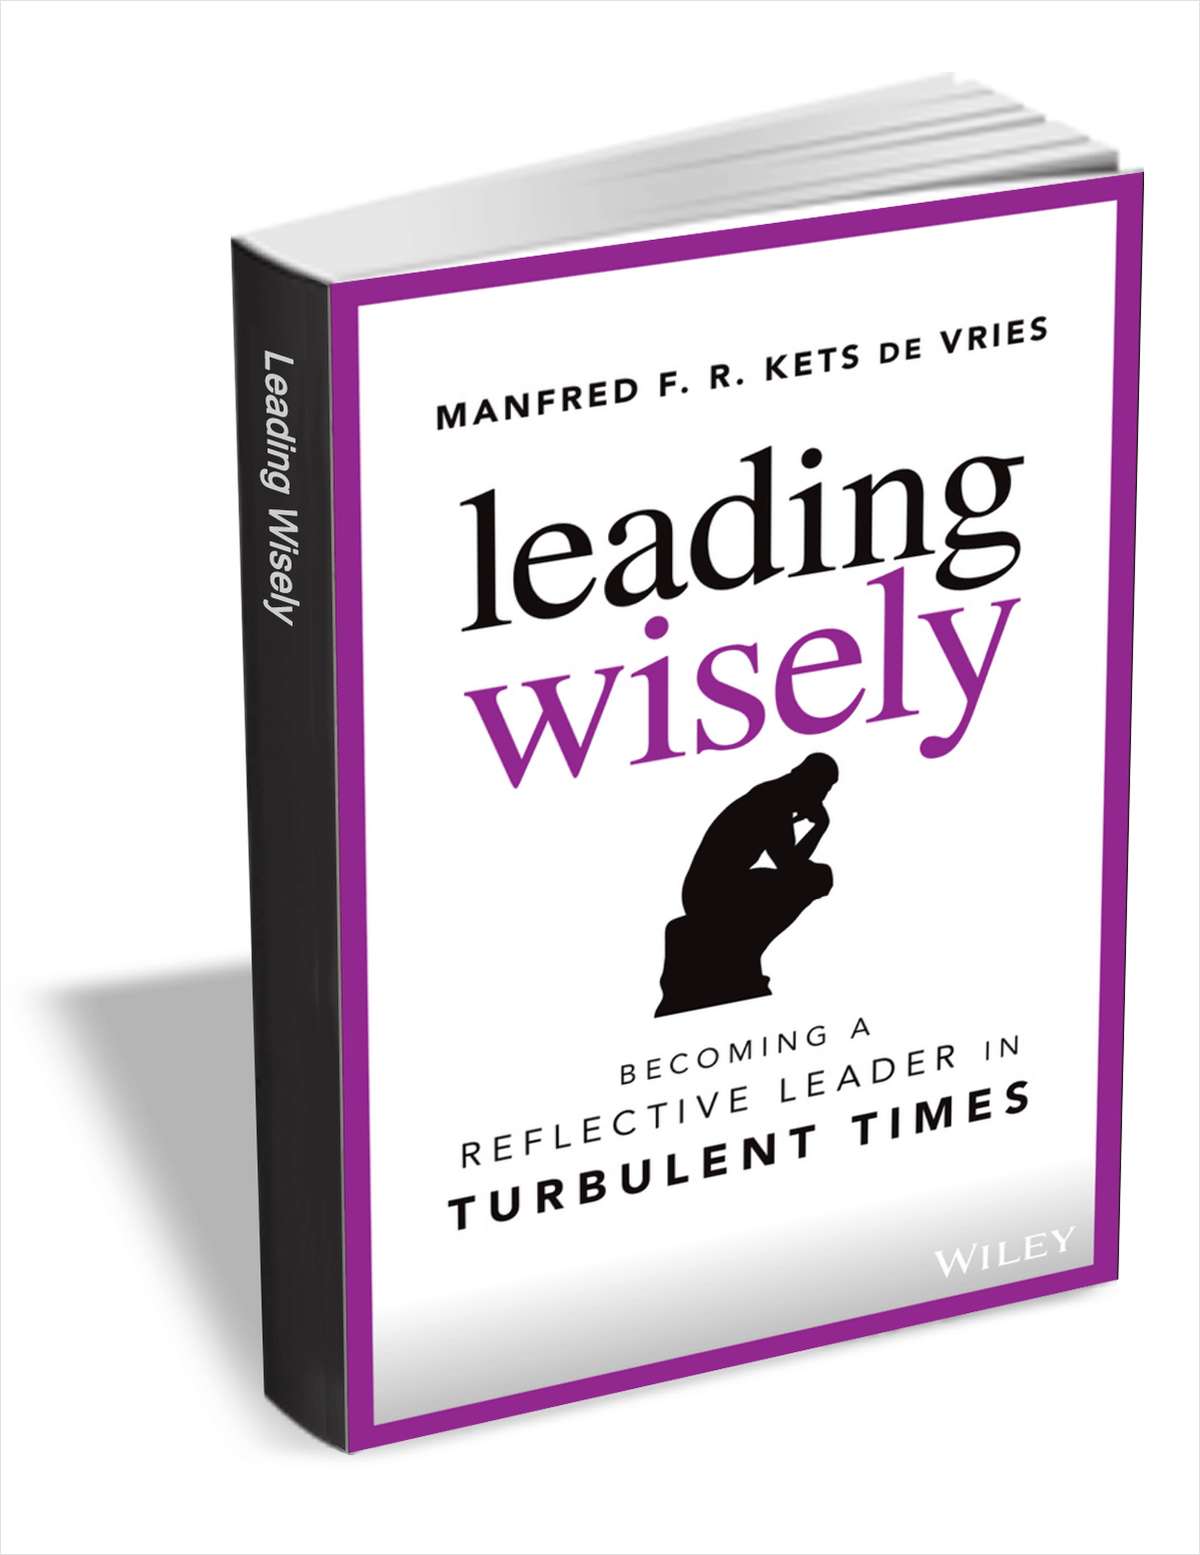 Leading Wisely: Becoming a Reflective Leader in Turbulent Times ($14.00 Value) FREE for a Limited Time